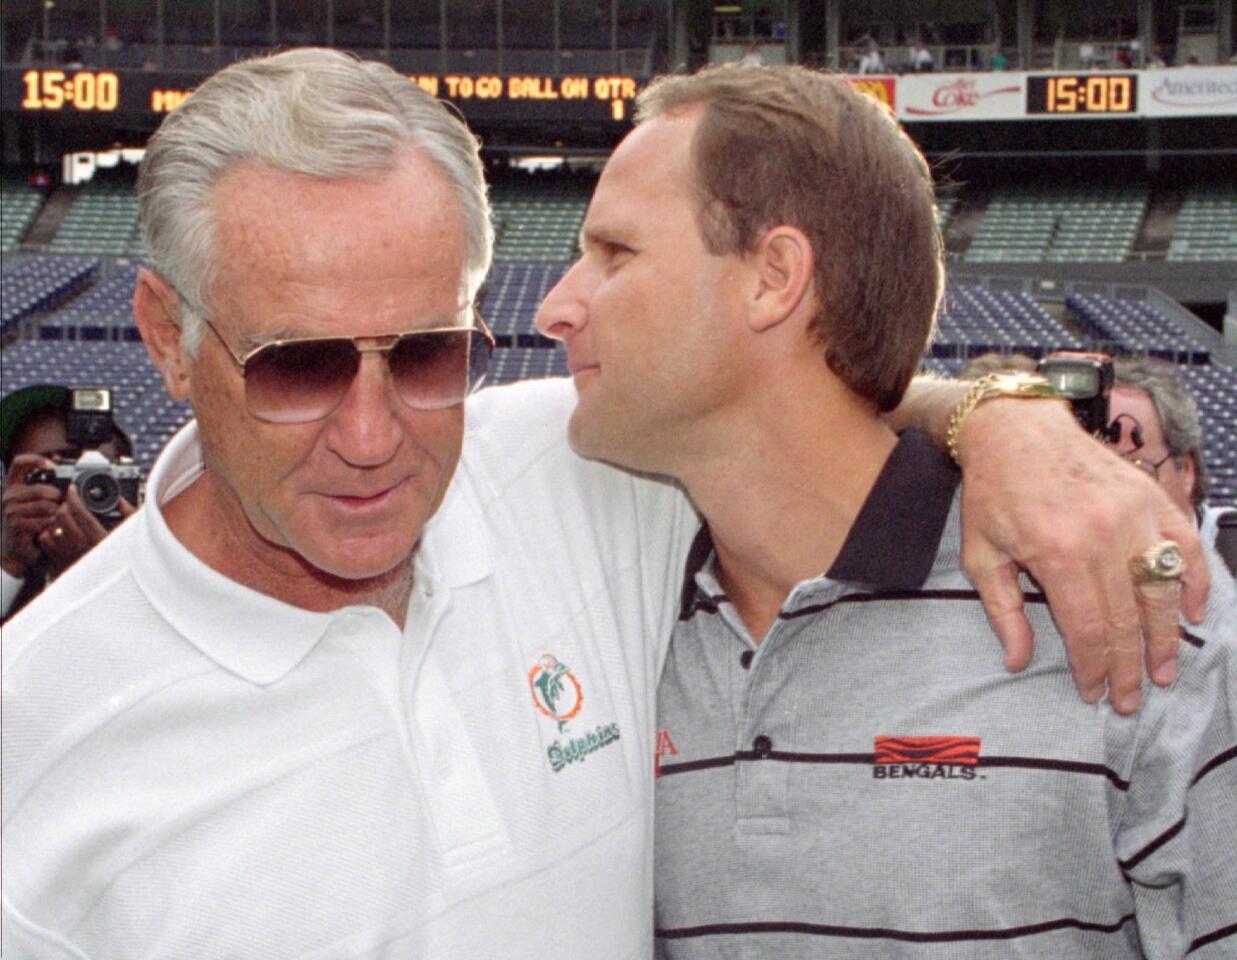 FILE -- Miami Dolphins head coach Don Shula, left, meets with his son, Cincinnati Bengals head coach Dave Shula, before the start of their game in Cincinnati in this Oct. 1, 1995 photo. Don Shula, the NFL's winningest coach, will resign as coach of the Miami Dolphins, a television station reported Thursday Jan. 4, 1996. A spokesman for Dolphins' owner H. Wayne Huizenga disputed the report. (AP Photo/David Kohl) ORG XMIT: NY128